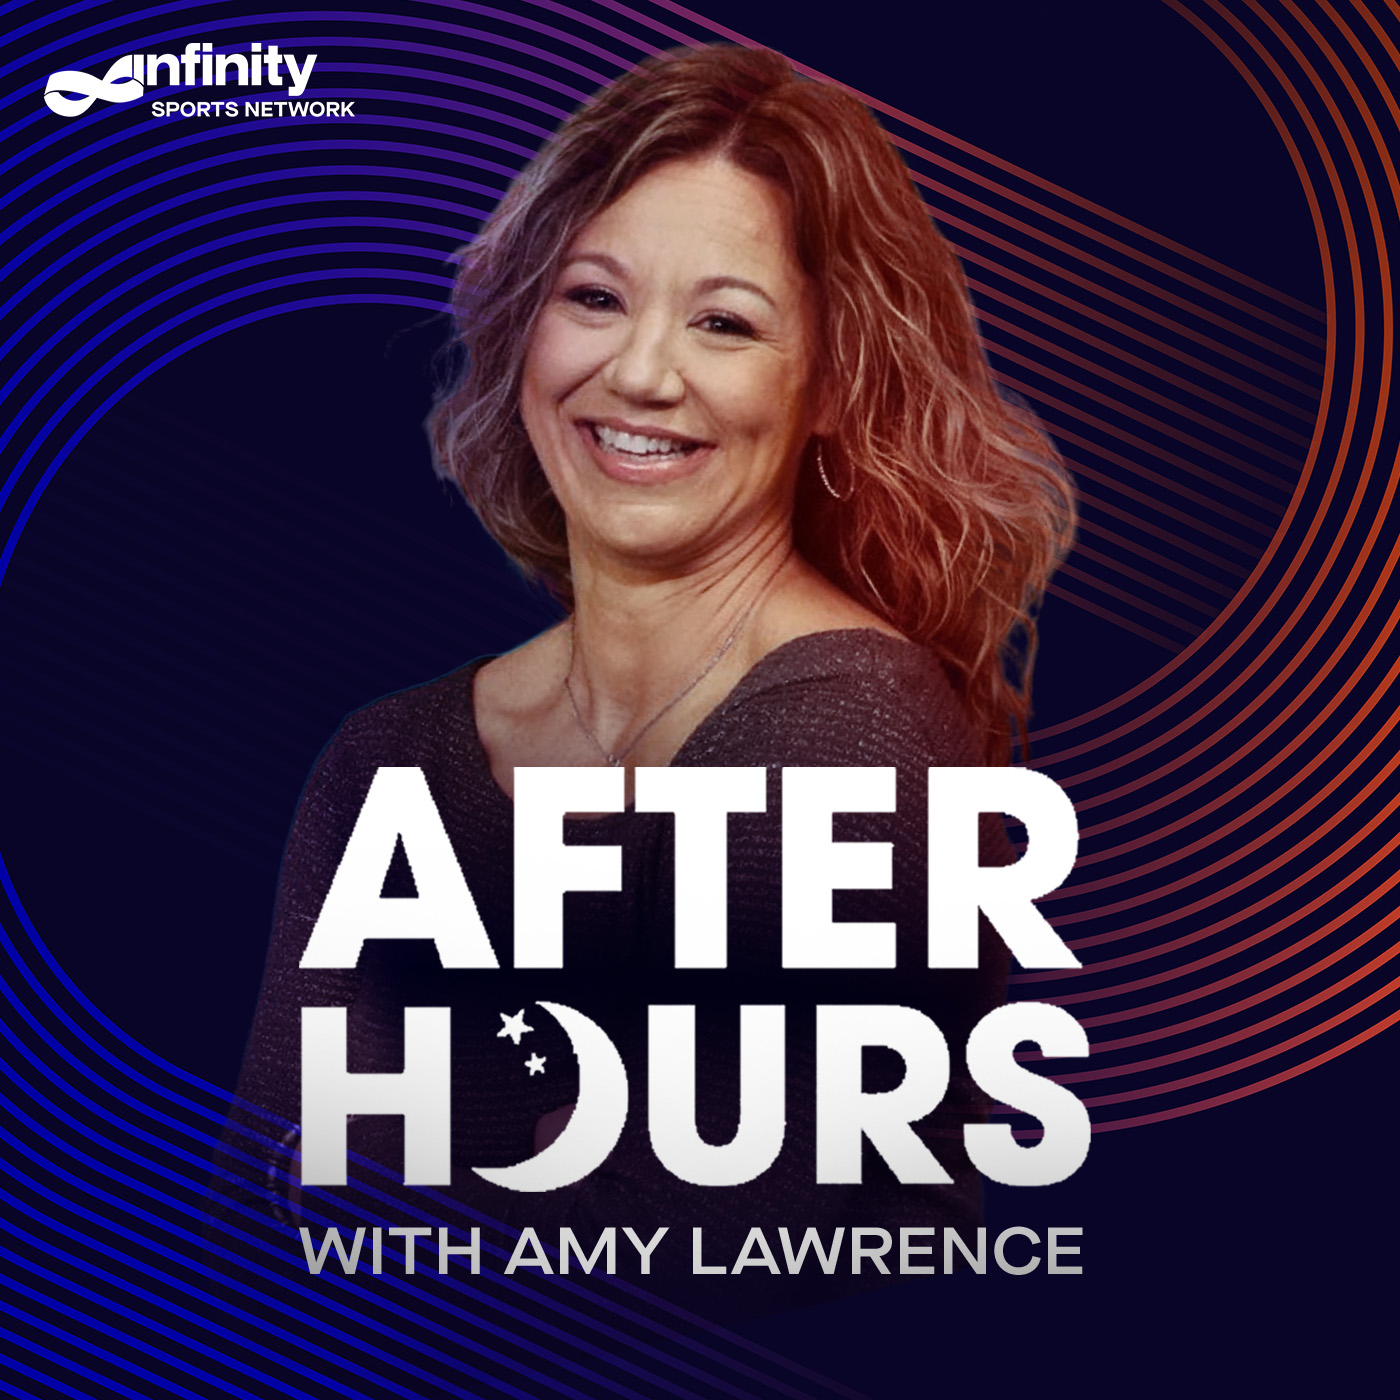 12-10-21 After Hours with Amy Lawrence PODCAST: Hour 4